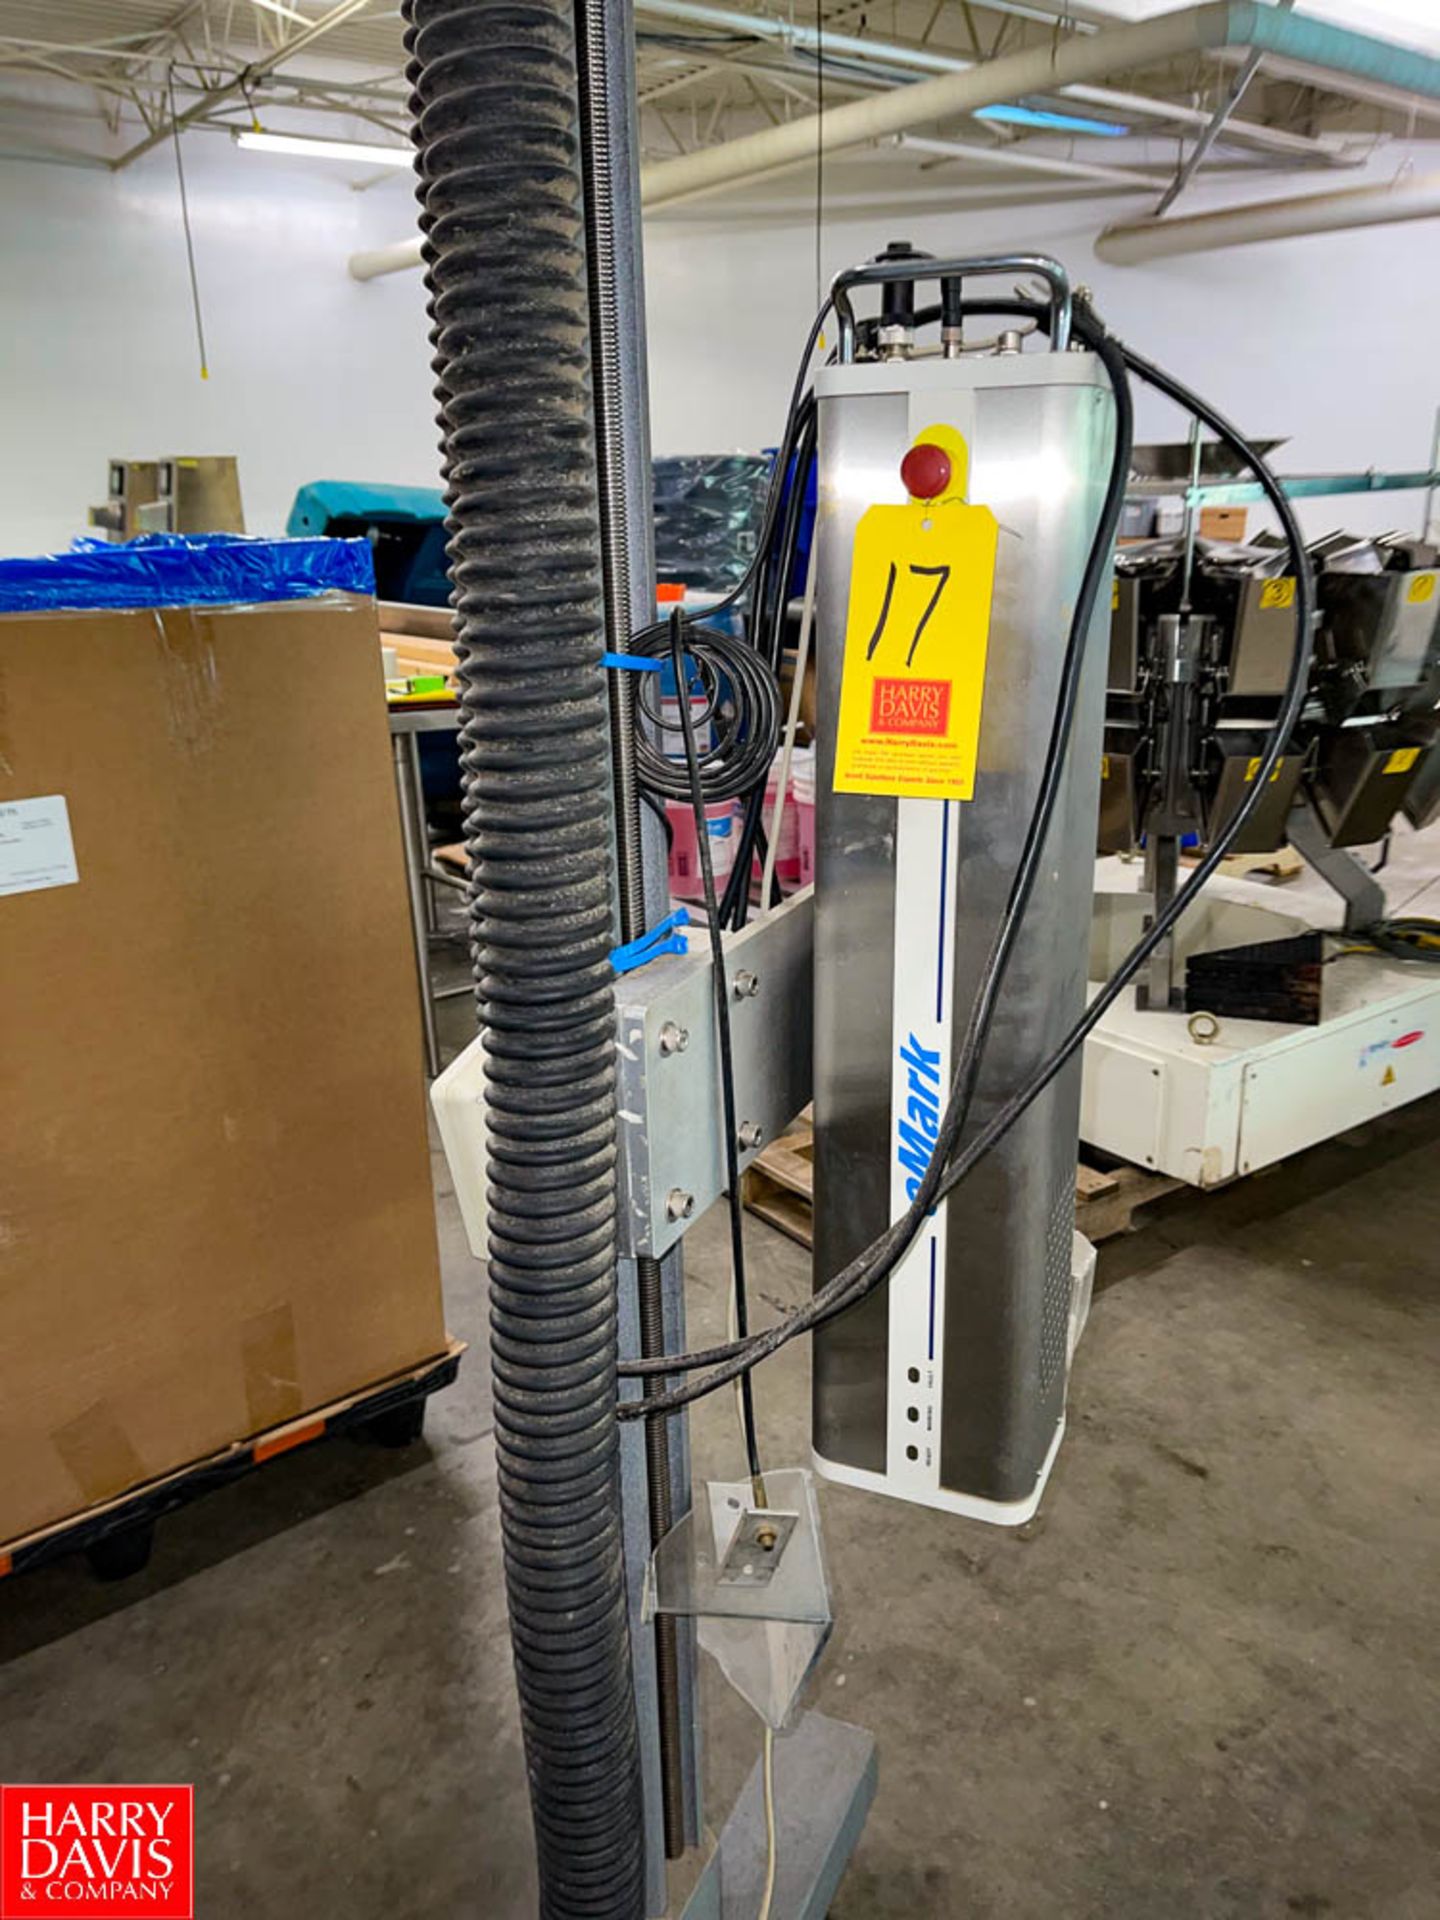 2014 eMark Laser Coder with Stand, S/N 482412933Location:Blawnox, PA Rigging Fee: $ 25